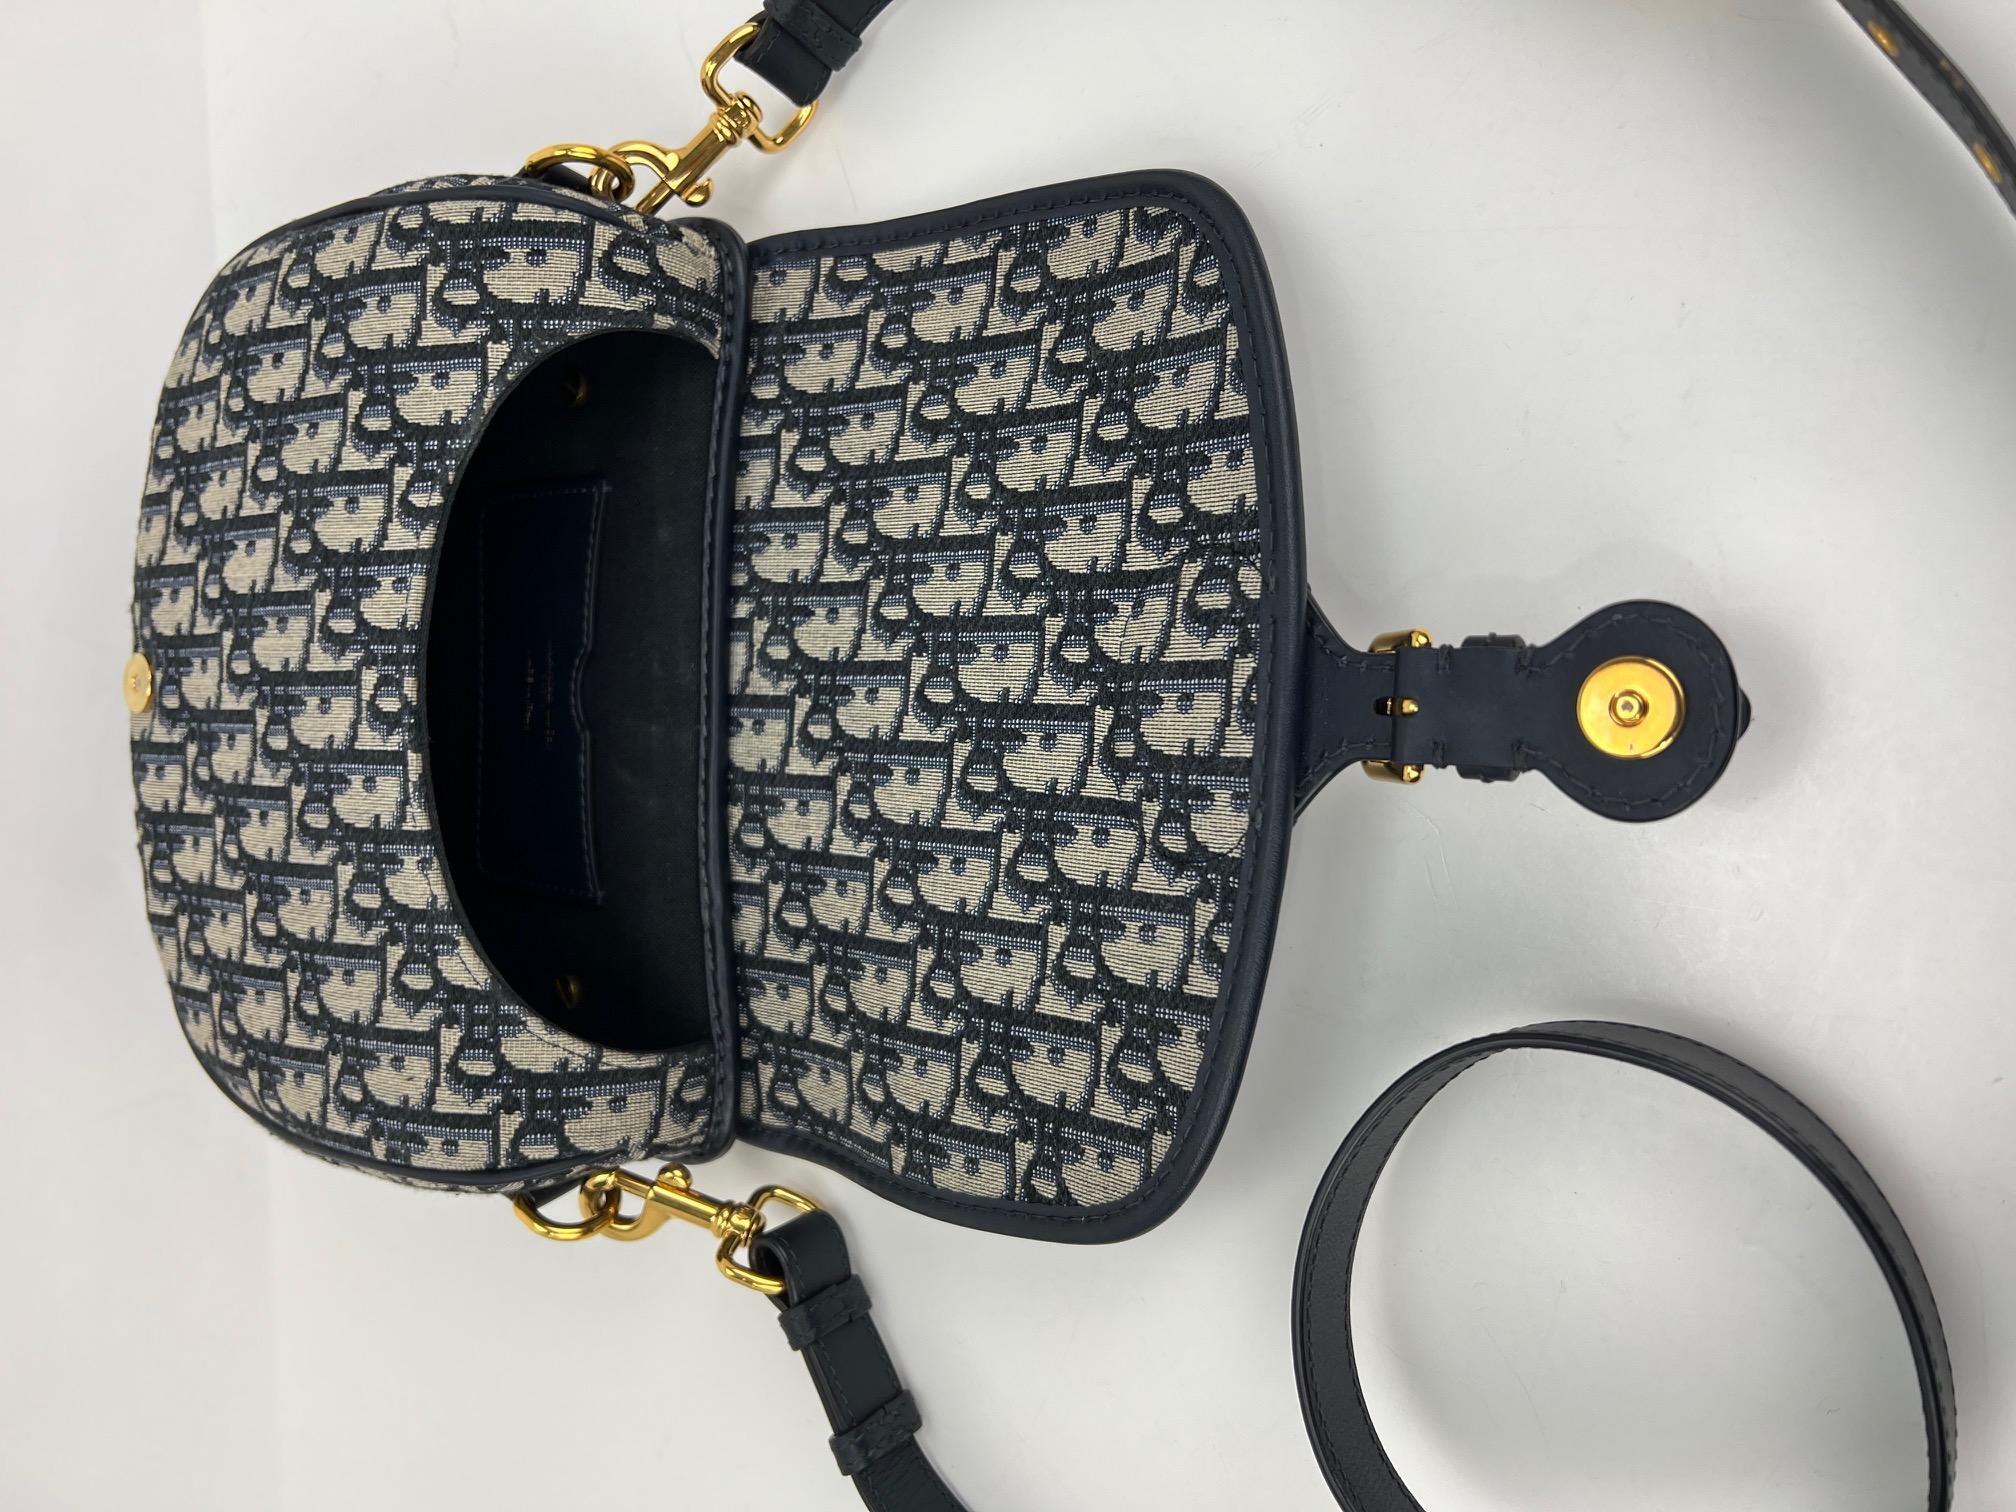 Pre-Owned  100% Authentic
Dior Oblique Jacquard Blue Medium
Bobby Flap Bag
RATING: A...excellent, near mint, only
slight signs of wear
MATERIAL: Dior Oblique jacquard, leather trim
STRAP: adjustable, removable leather
DROP: 19'' to 21''
COLOR: 